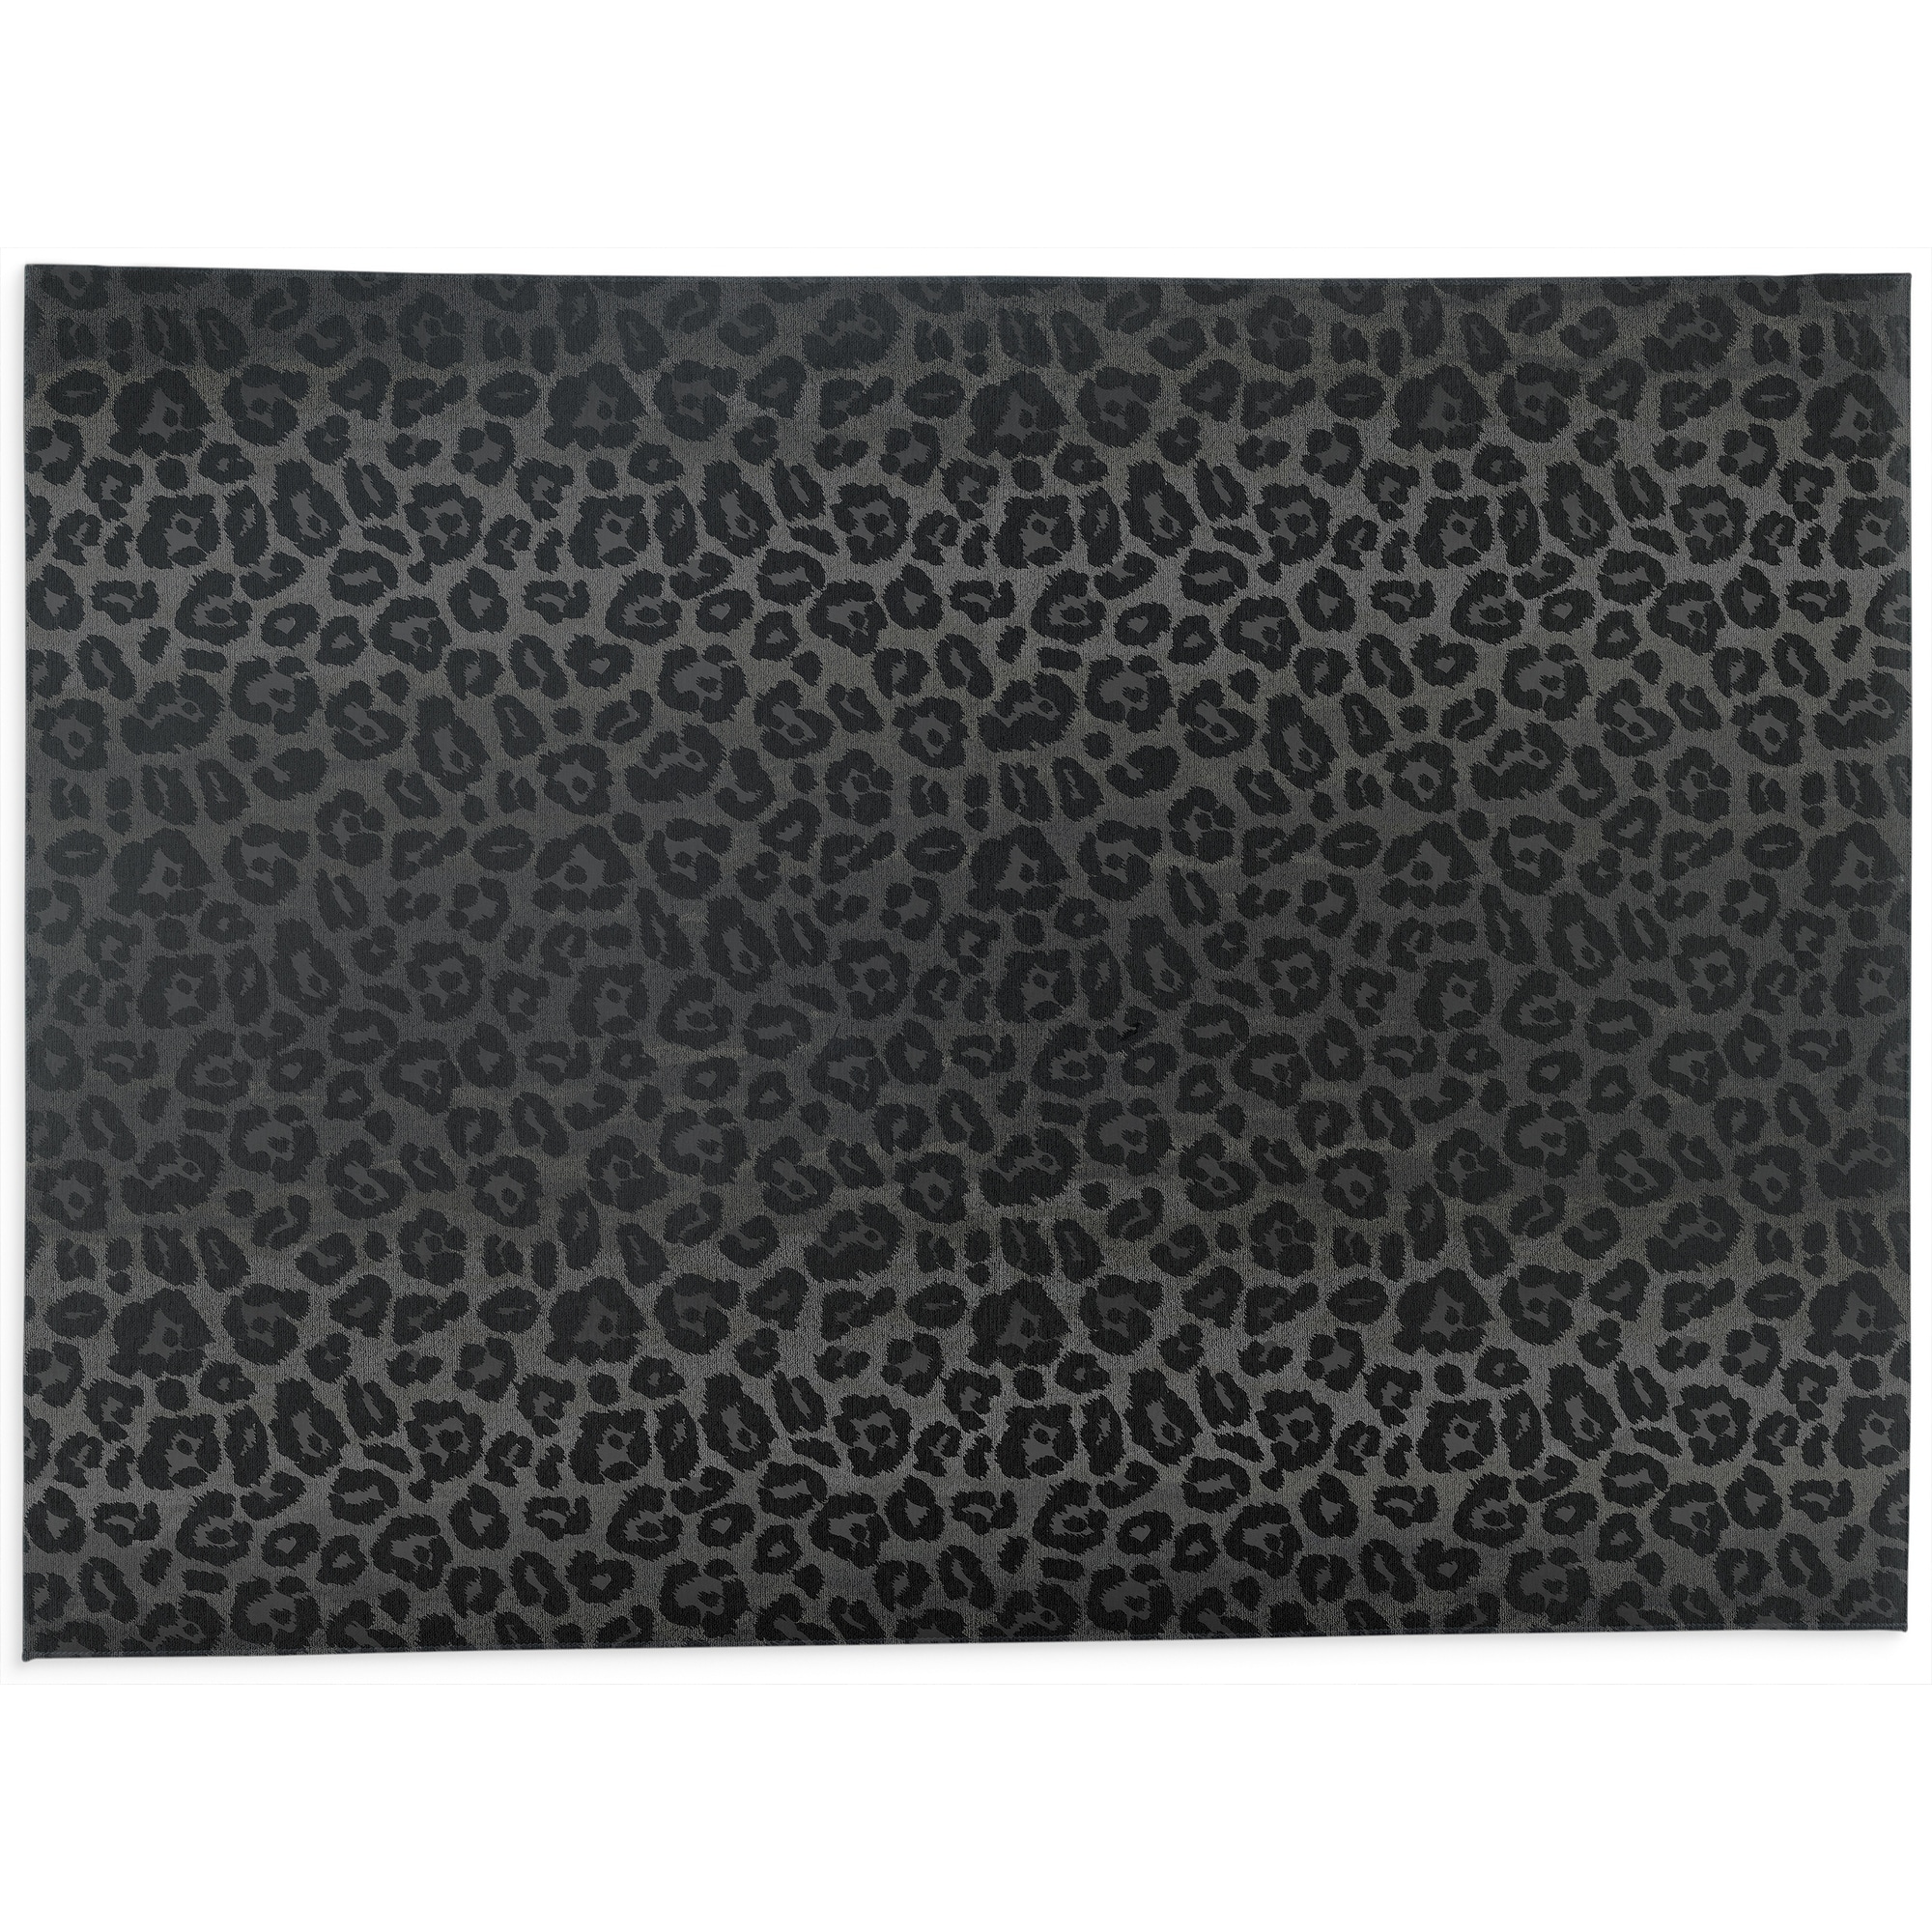 https://ak1.ostkcdn.com/images/products/is/images/direct/0e6acc8e5cdff715240426fdc956554c715d970a/CHEETAH-CHARCOAL-Bath-Rug-By-Kavka-Designs.jpg